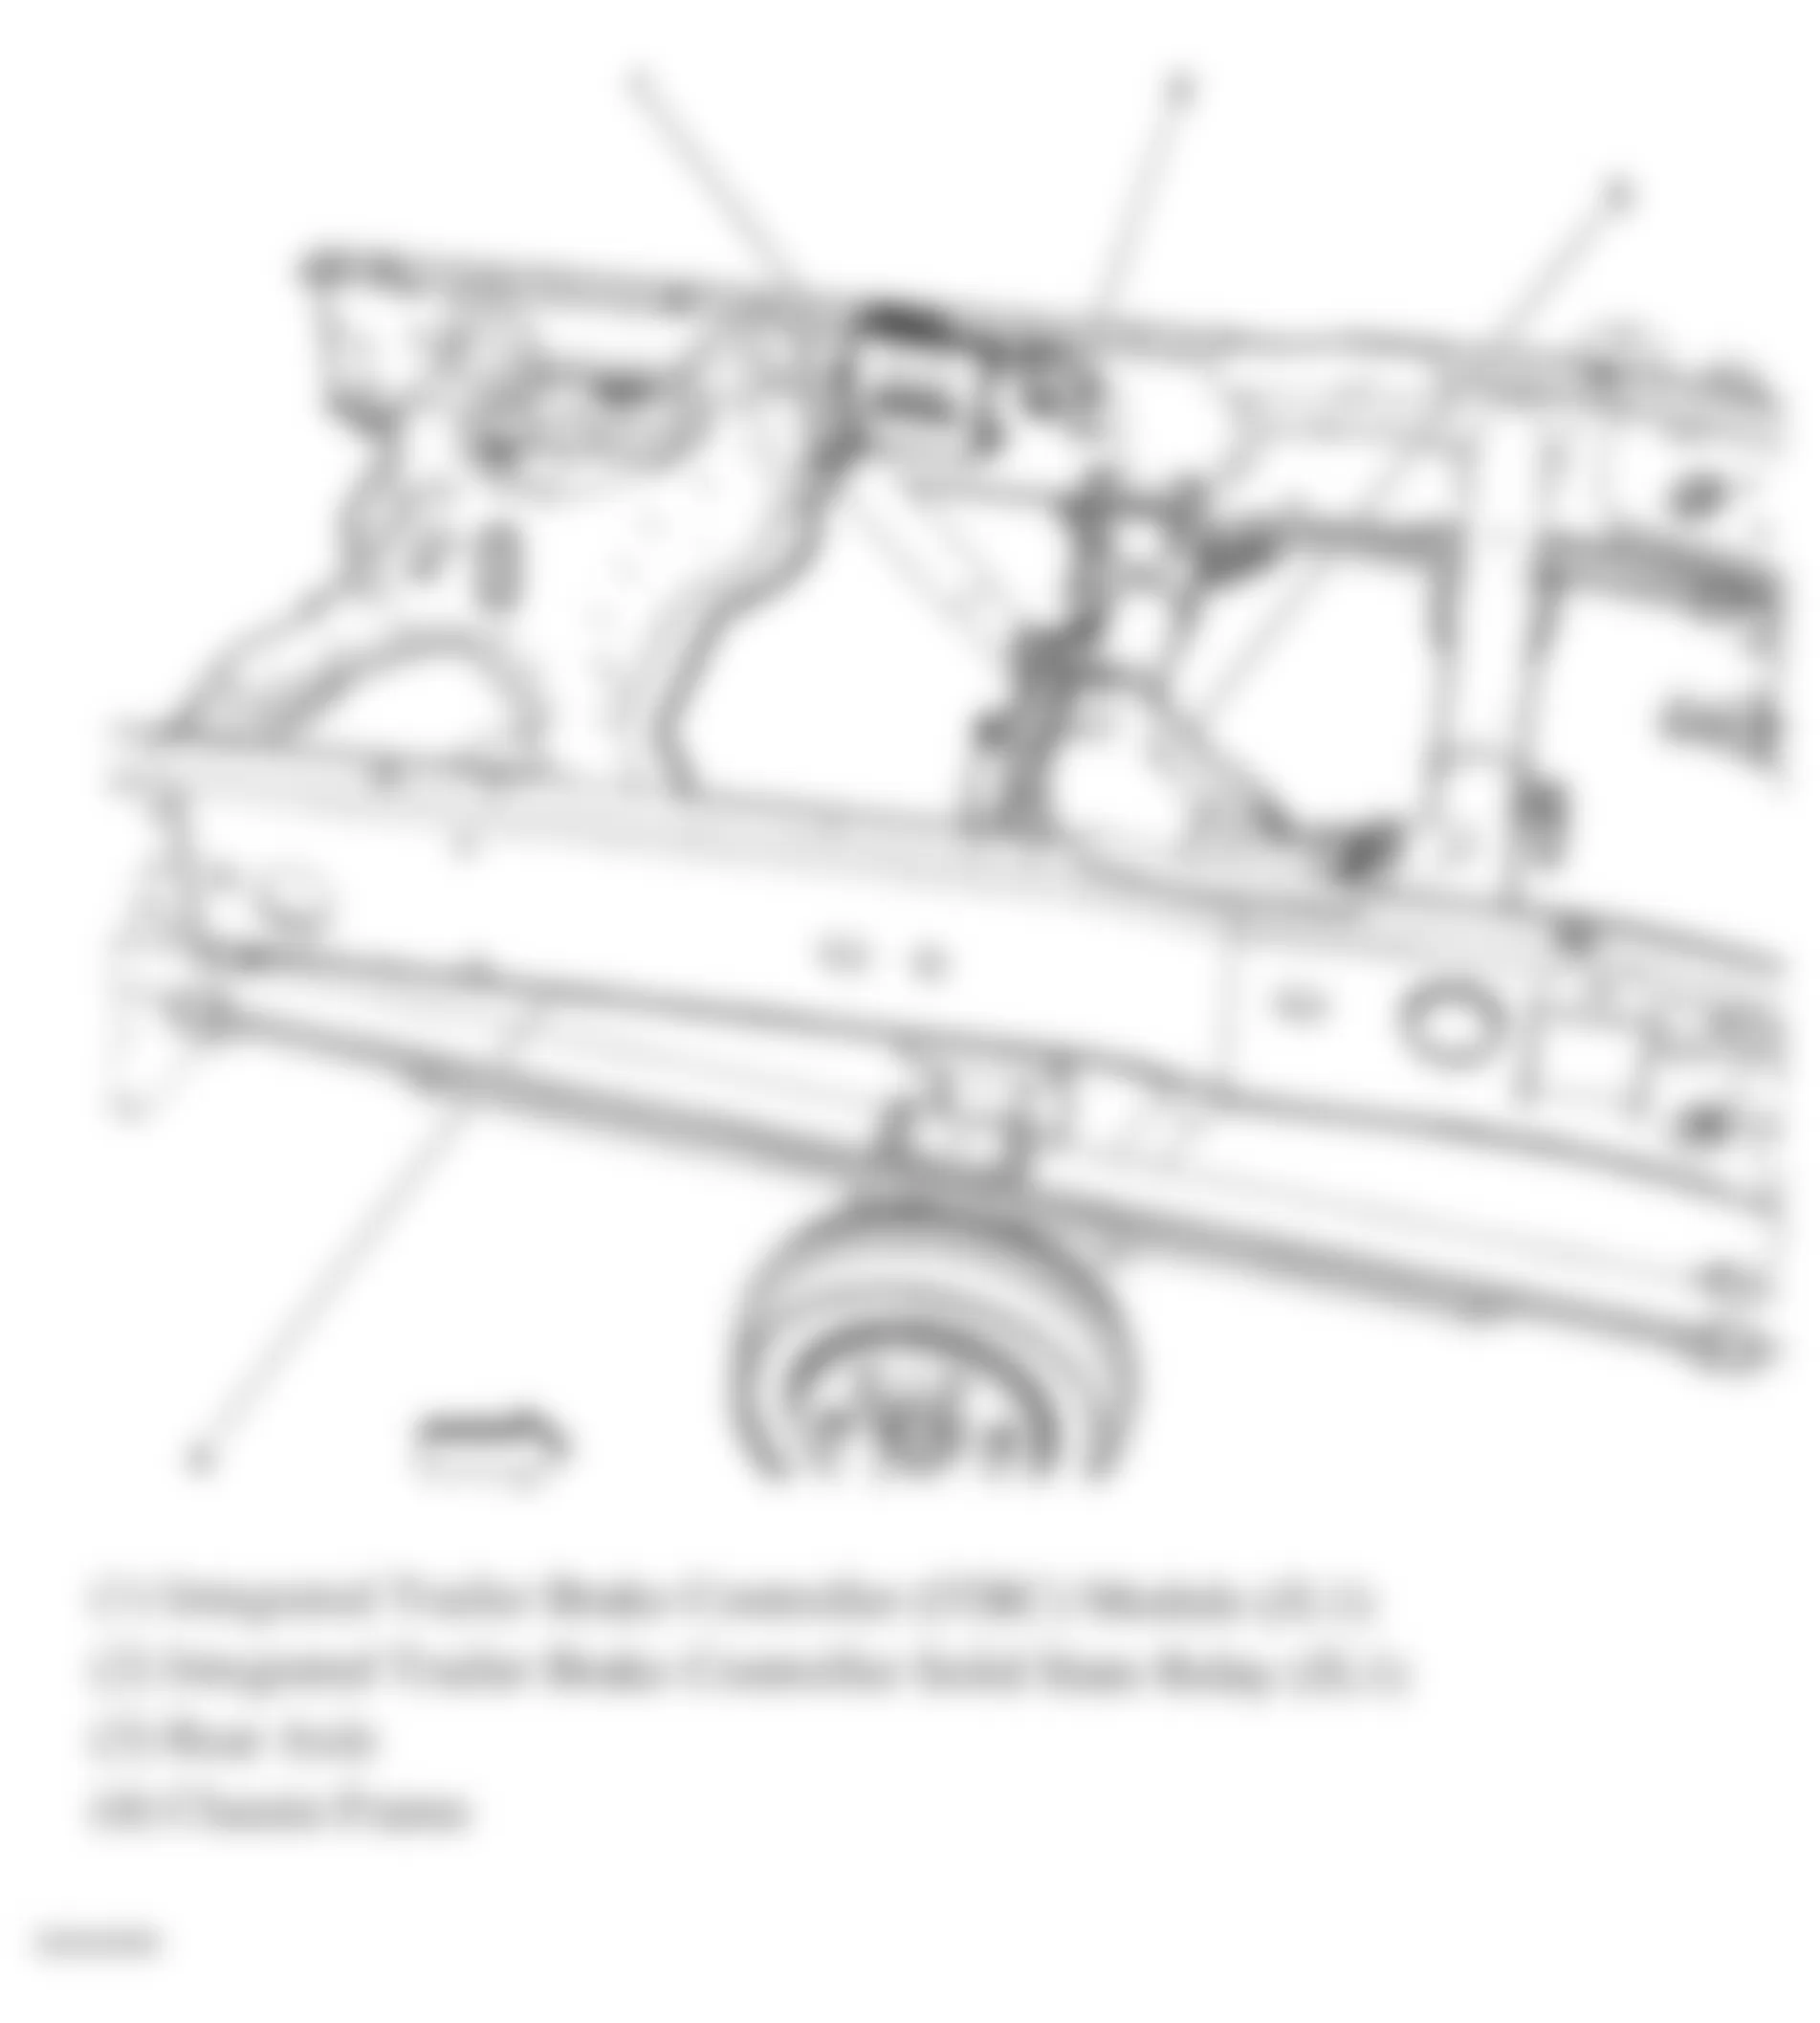 GMC Sierra 3500 HD 2008 - Component Locations -  Rear Of Vehicle